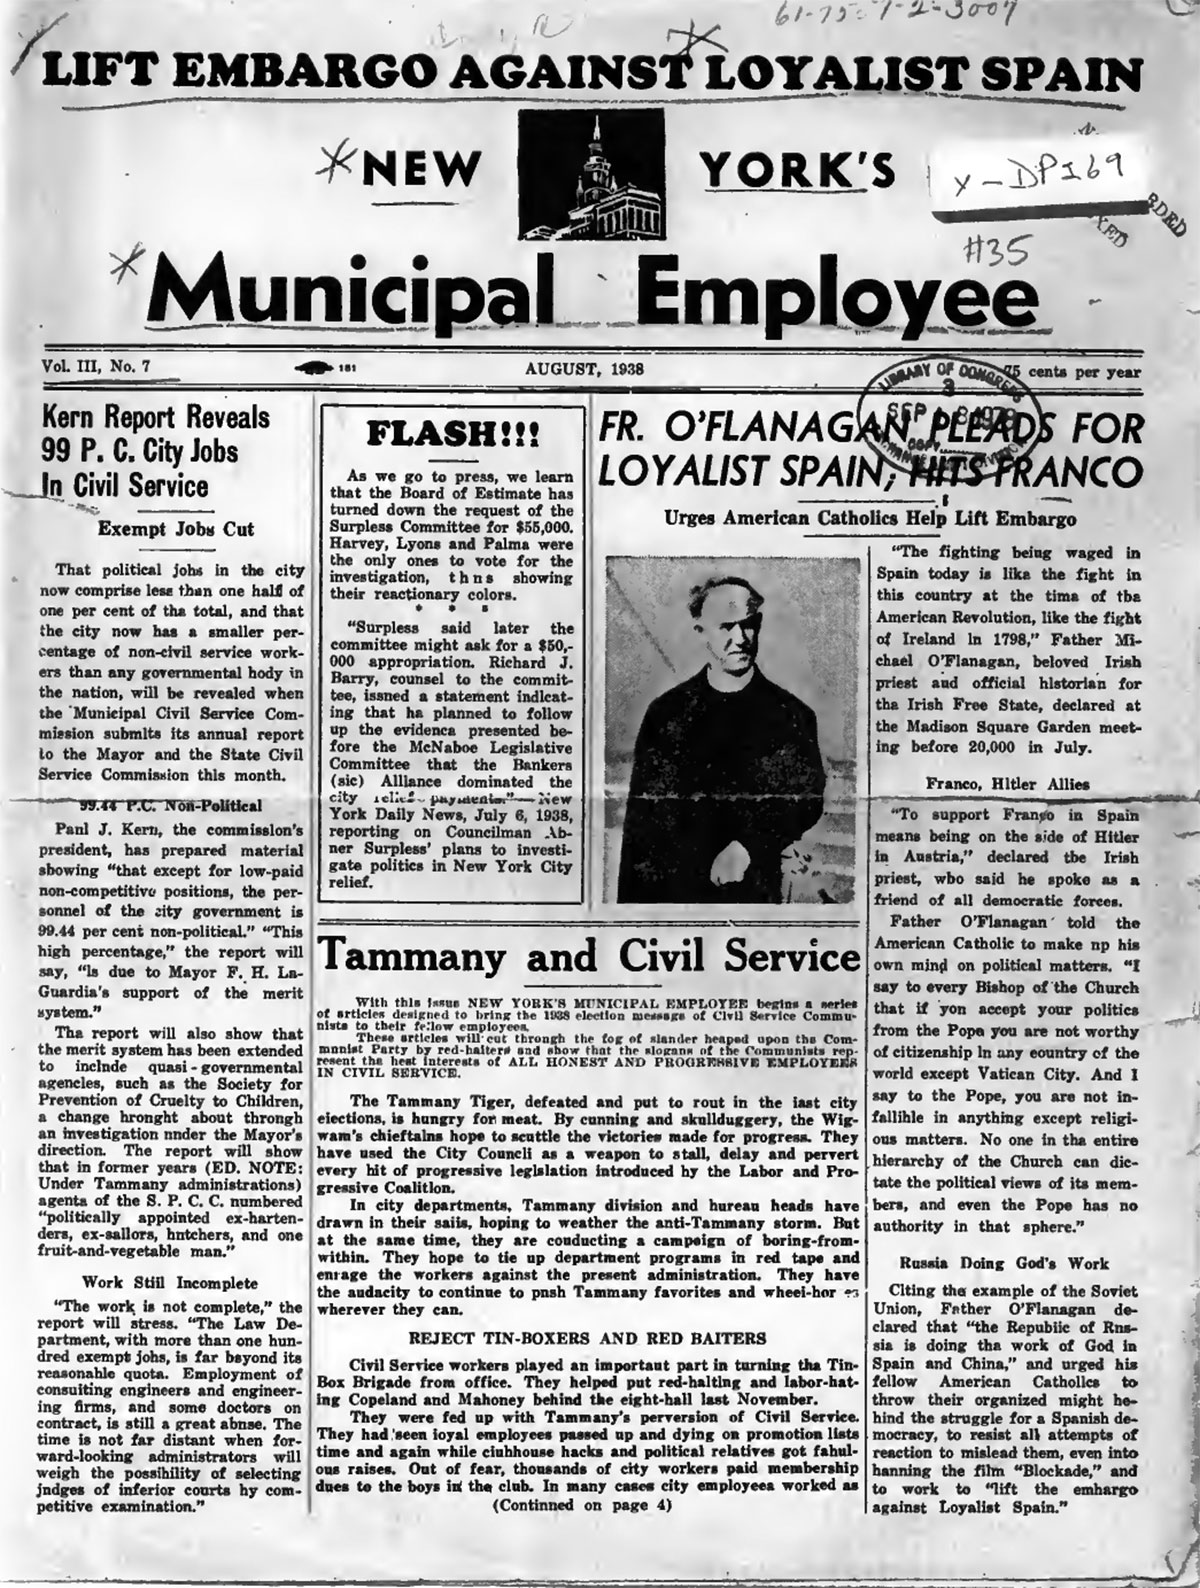 Article from New York's Municipal Employee, dated August 1938.